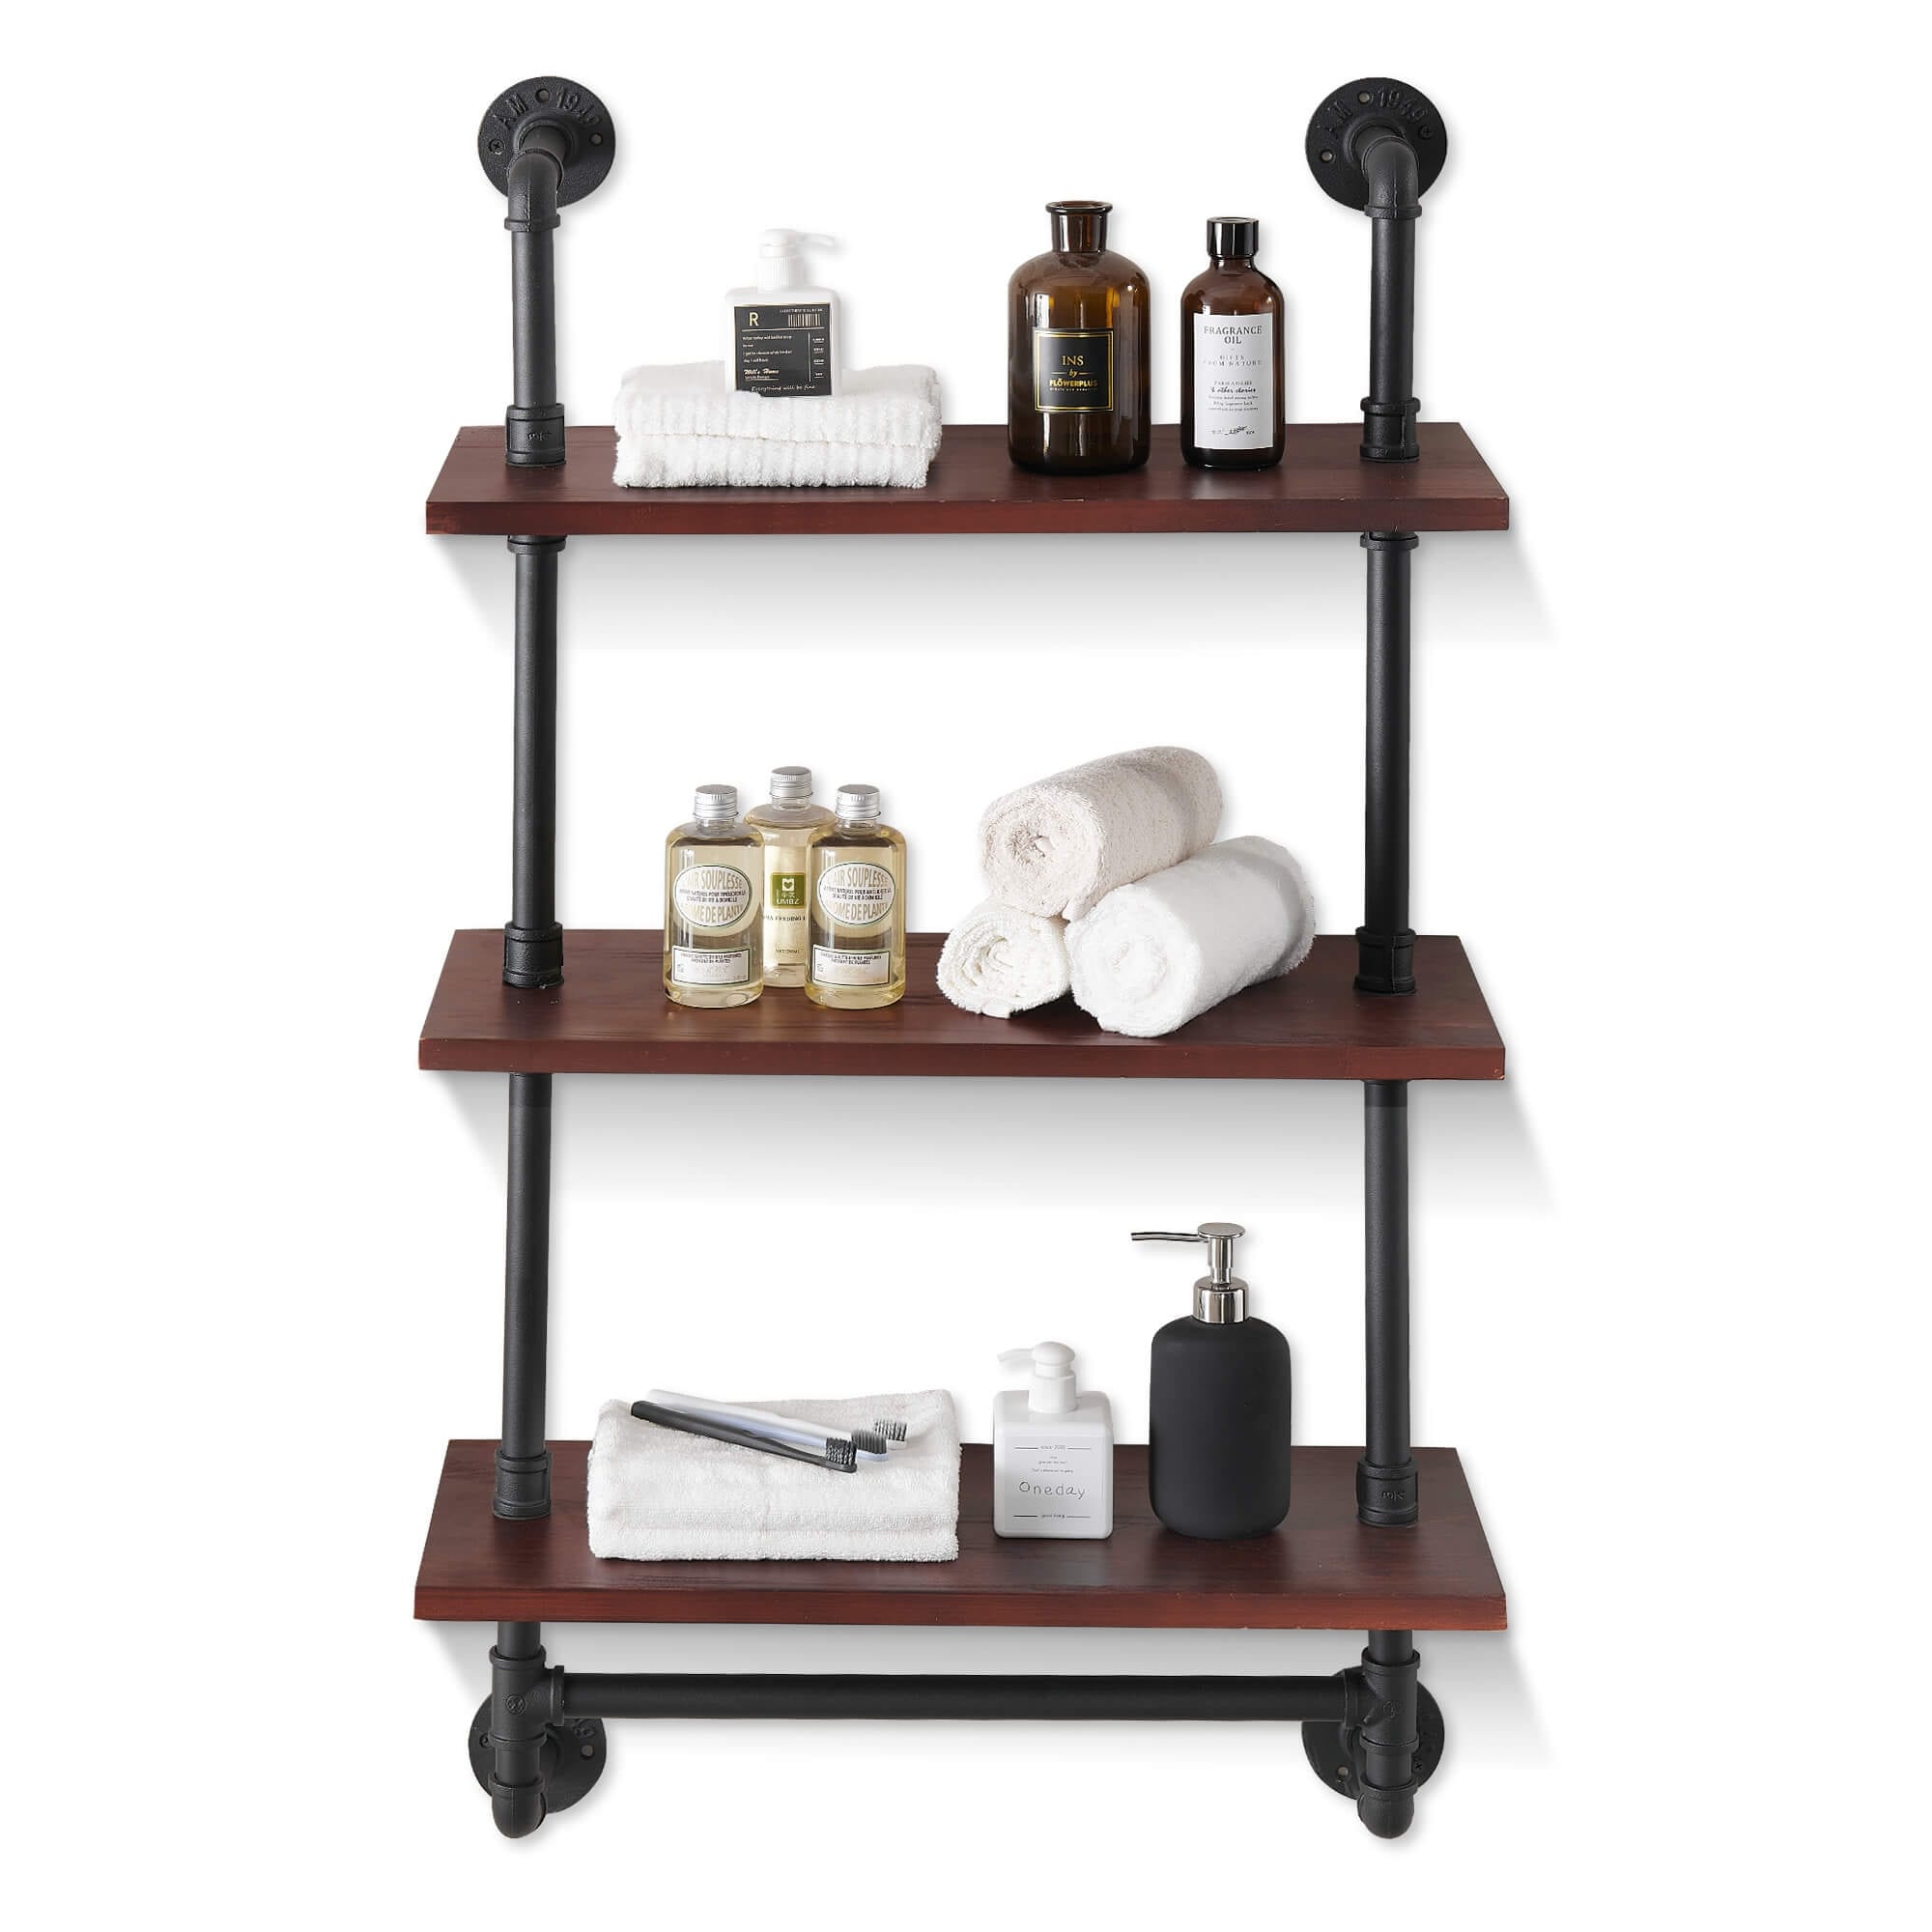 Details about   Cast Iron 3-Tier Vintage Industrial Pipe Bathroom Shelves Wall Mounted 